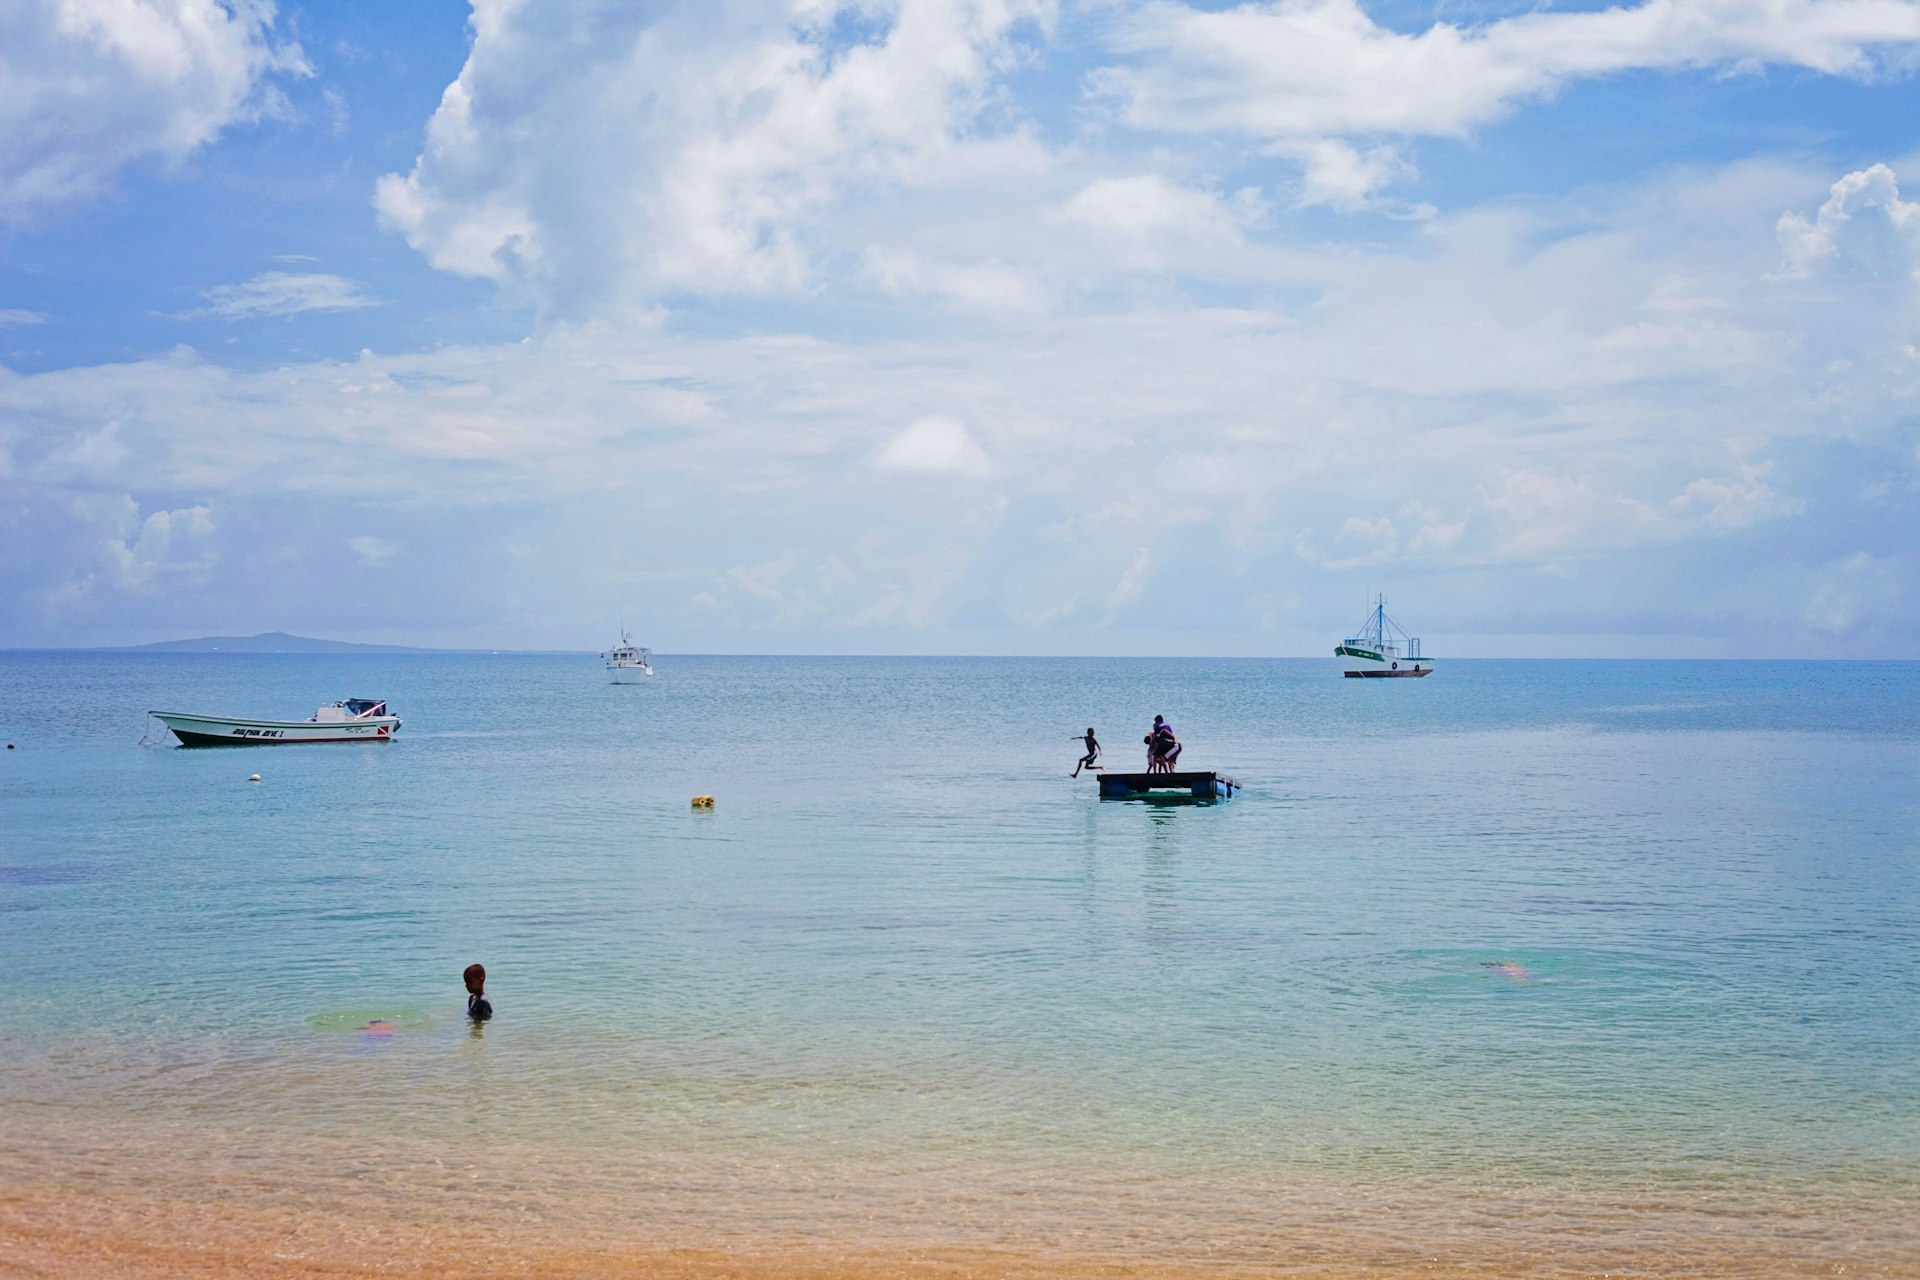 Looking out into the water as people and boats rest and play in the clear tropical water. Big Corn Island is seen on the horizon